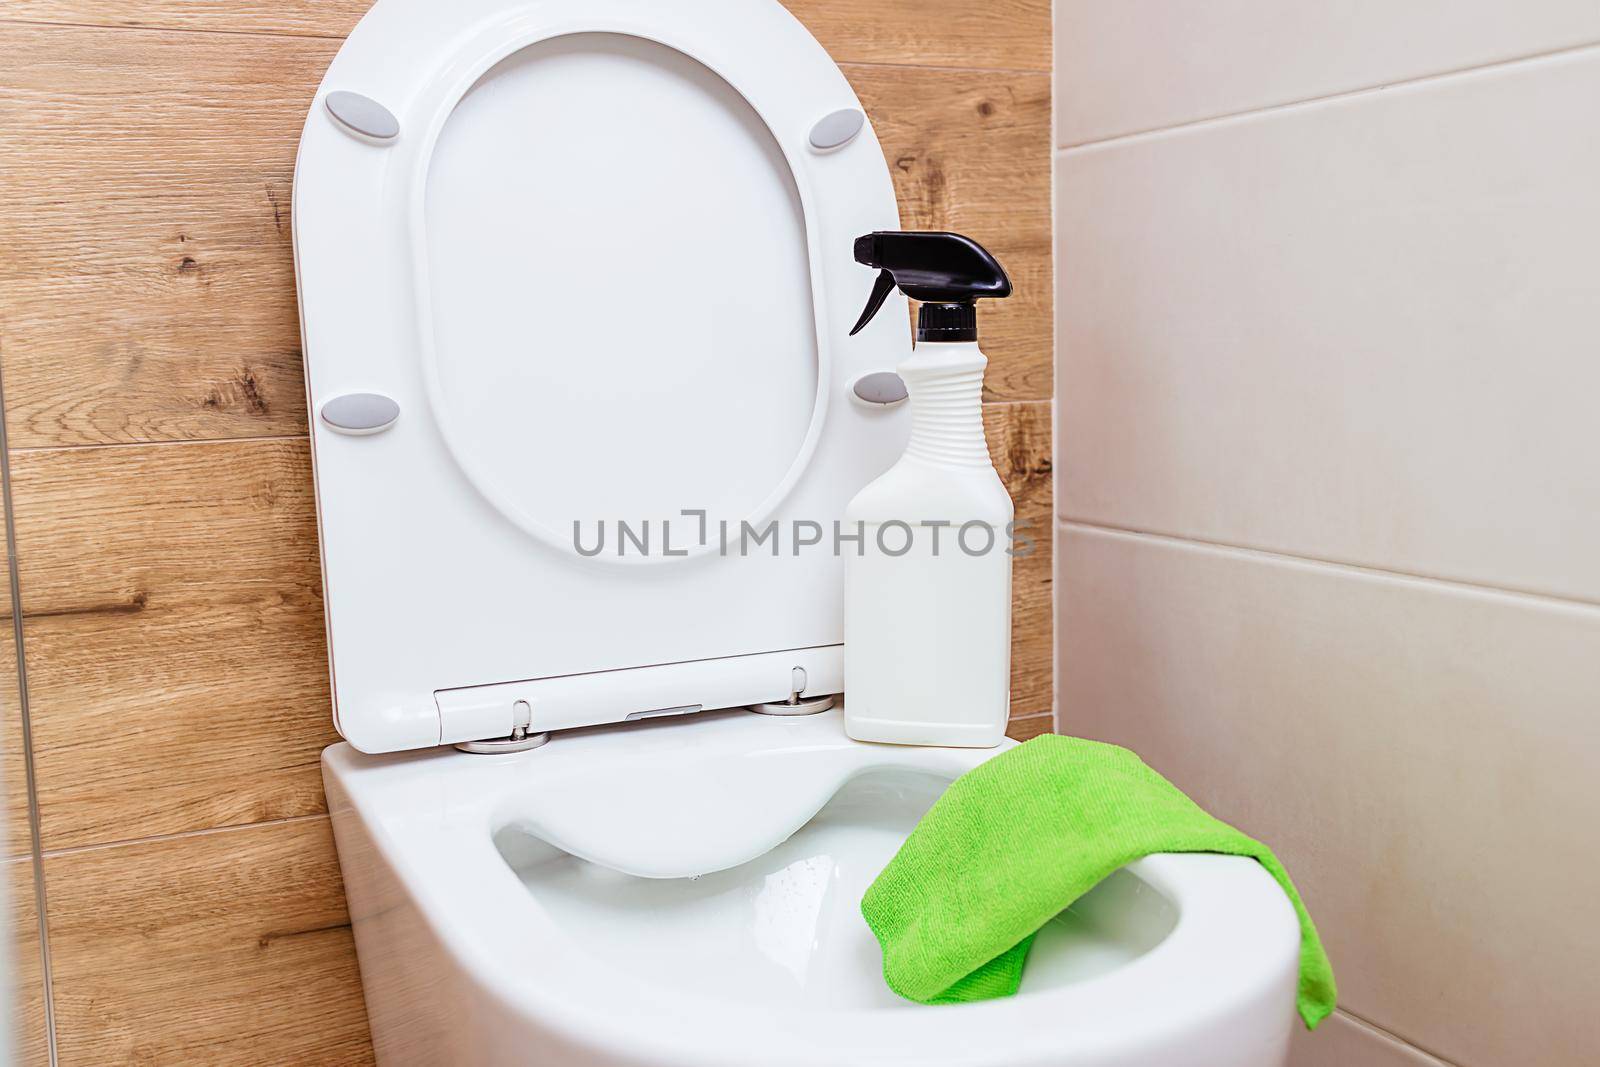 Mockup white detergent bottle, bathroom cleaning. Against the background of the toilet there is a jar of liquid, next to it is a rag, copy paste. Hygiene, cleaning and disinfection concept